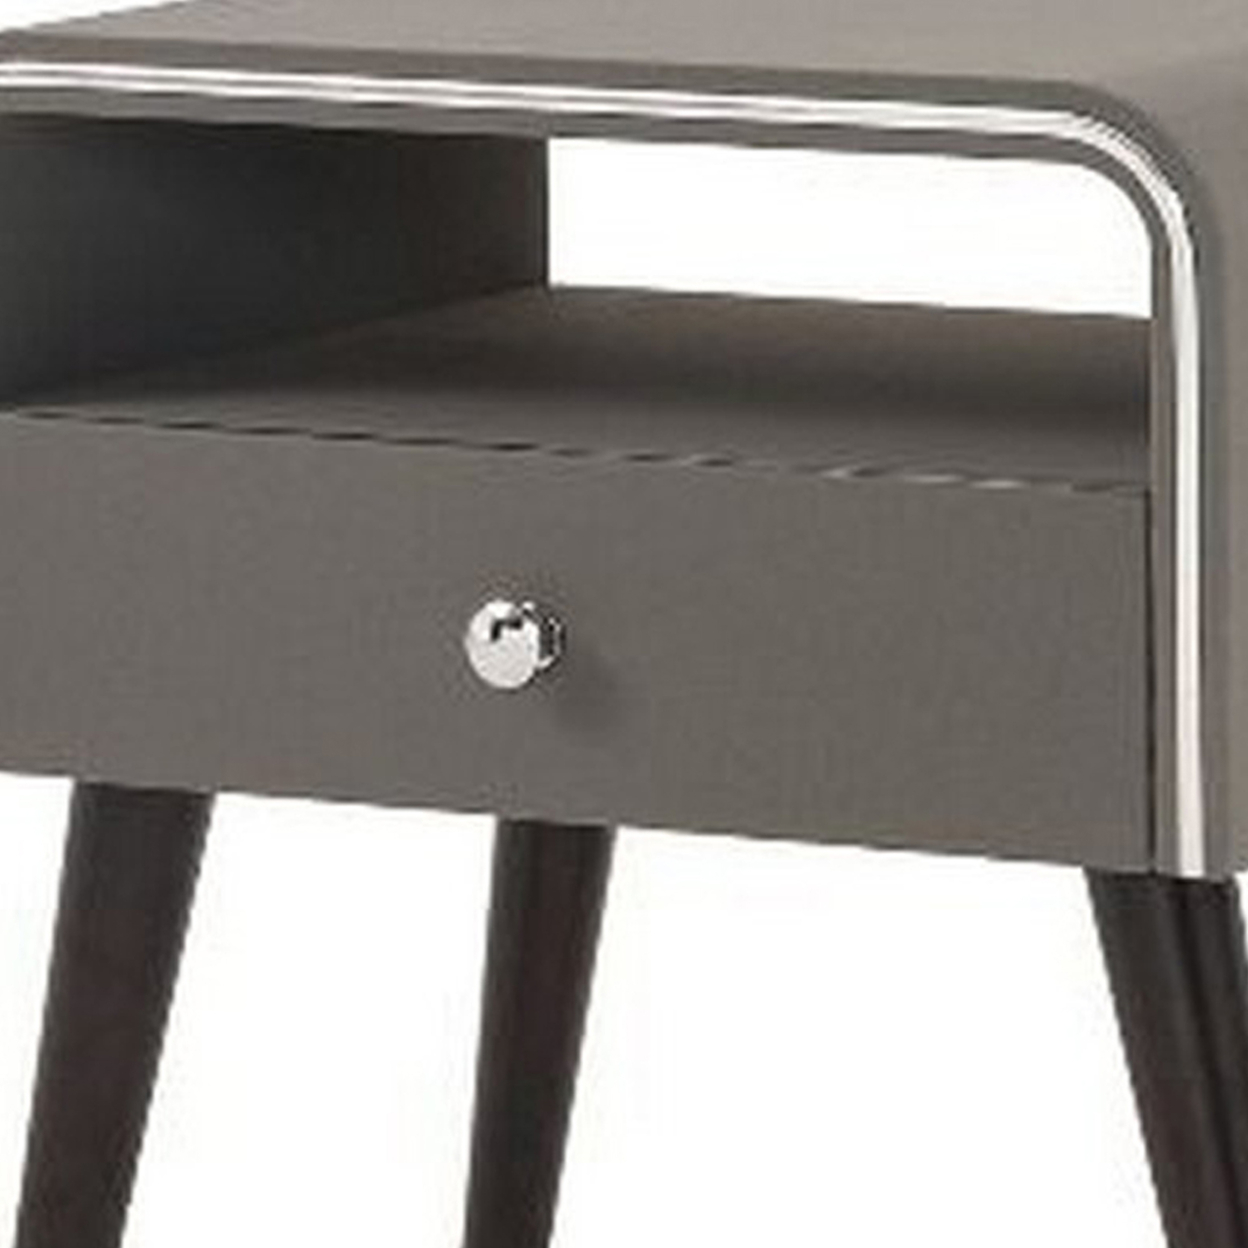 Curved Edge 1 Drawer Nightstand With Chrome Trim, Gray And Brown- Saltoro Sherpi